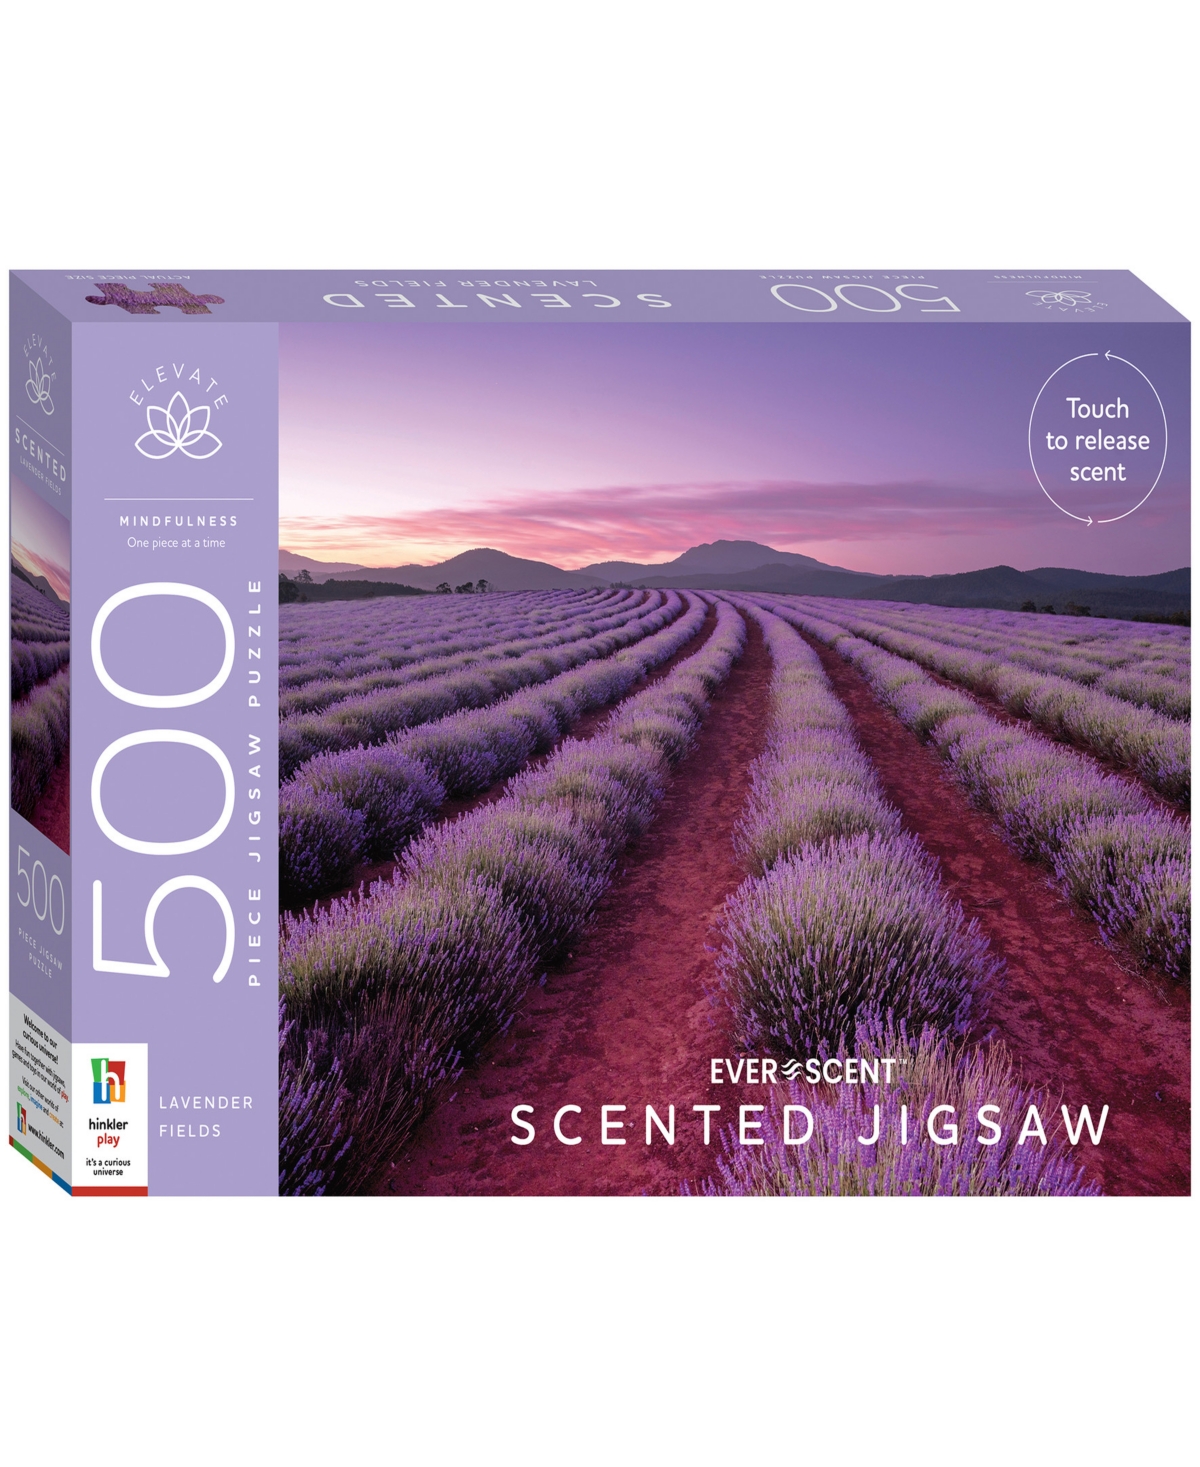 Elevate 500 Piece Scented Jigsaw Puzzle Lavender Fields Jigsaws For Adults Deluxe Jigsaw Puzzles 24 X 18 Int In Multi